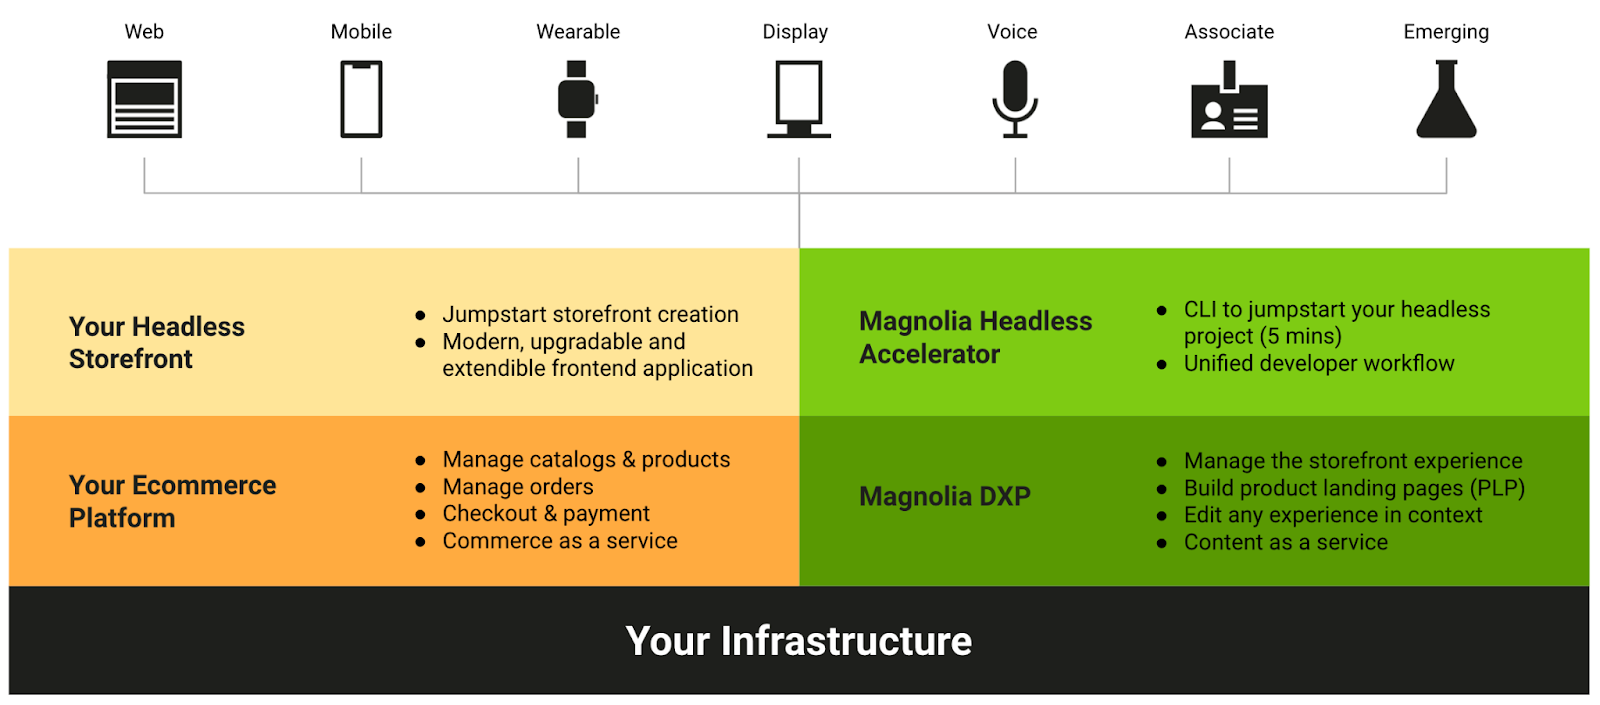 Your Infrastructure